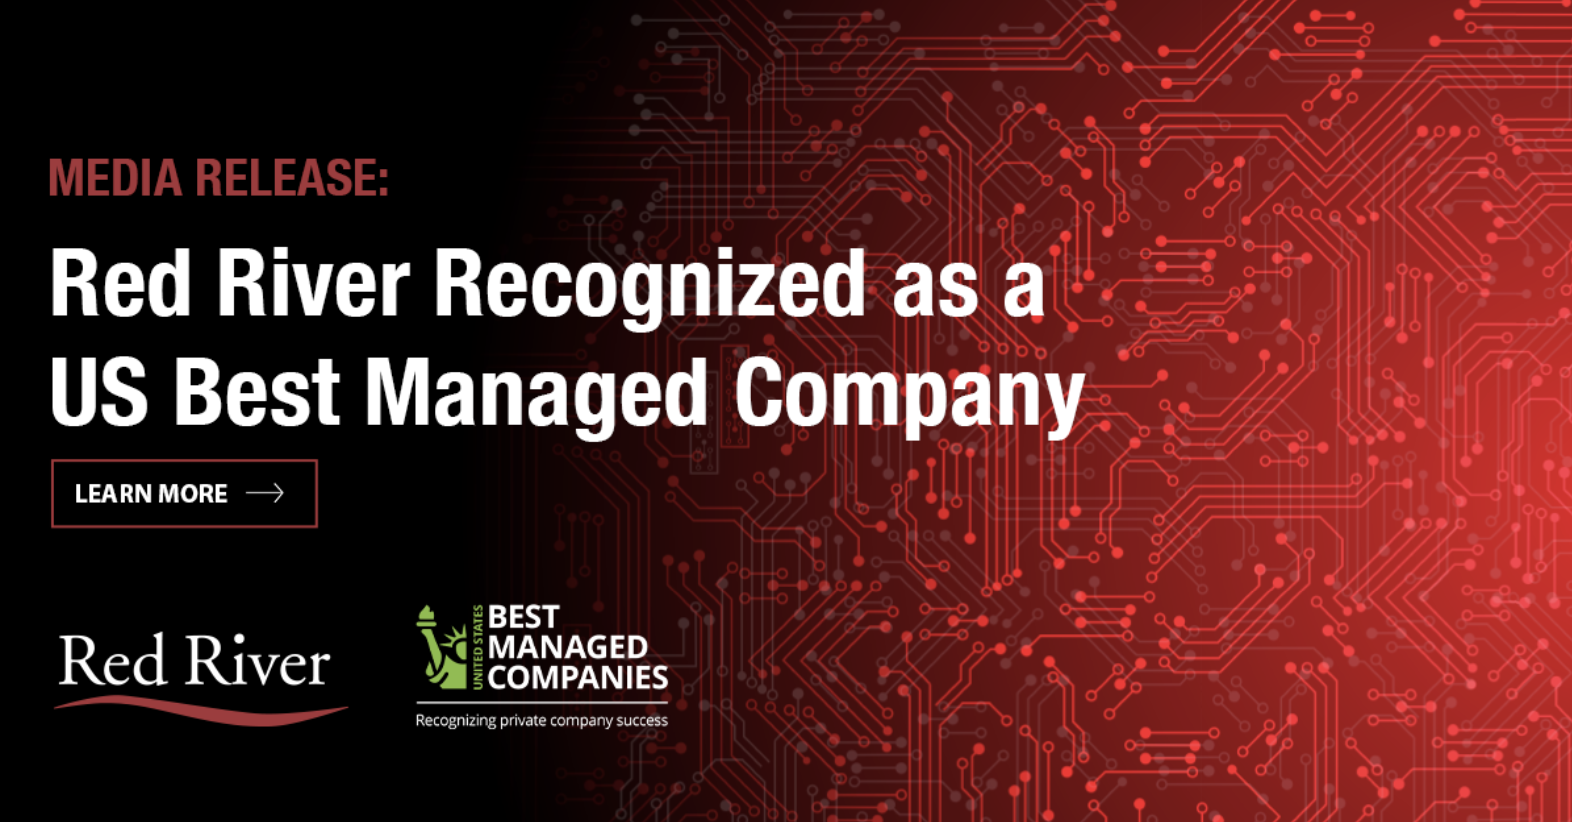 Red River Recognized as a US Best Managed Company